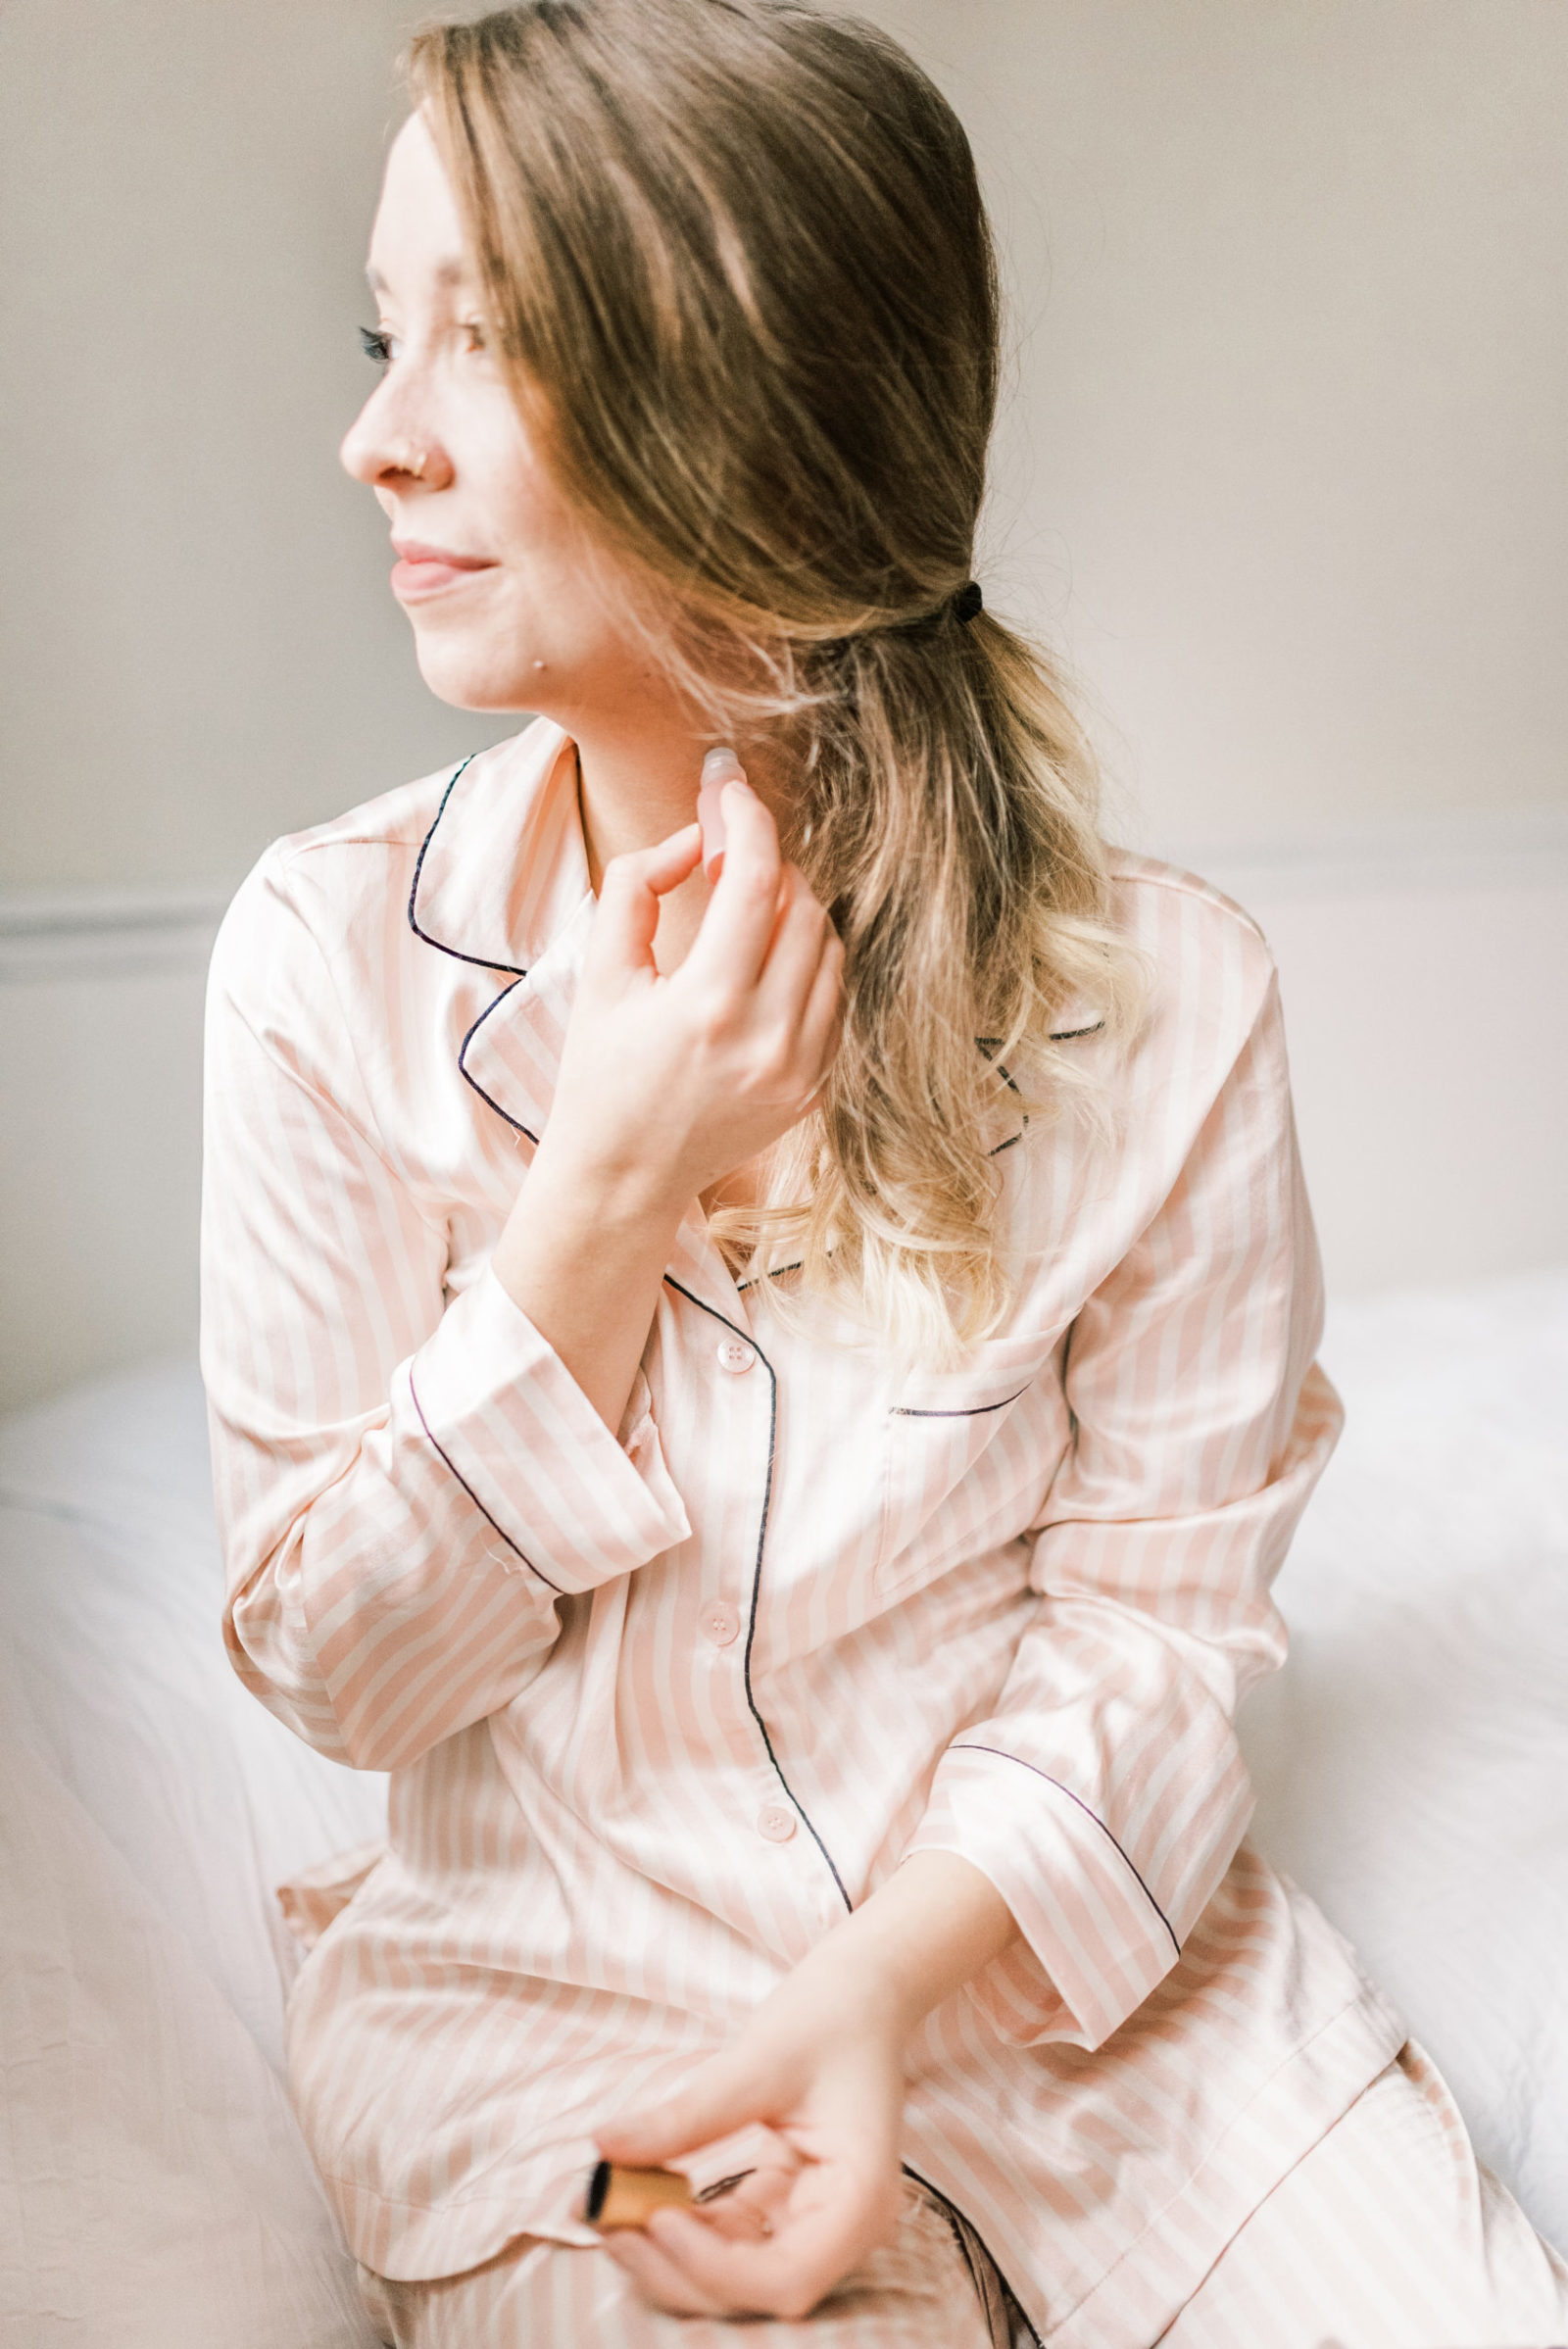 Alex Hinders shares her favorite sleep support diffuser blends using Whimsy + Wellness products and Young Living essential oils.